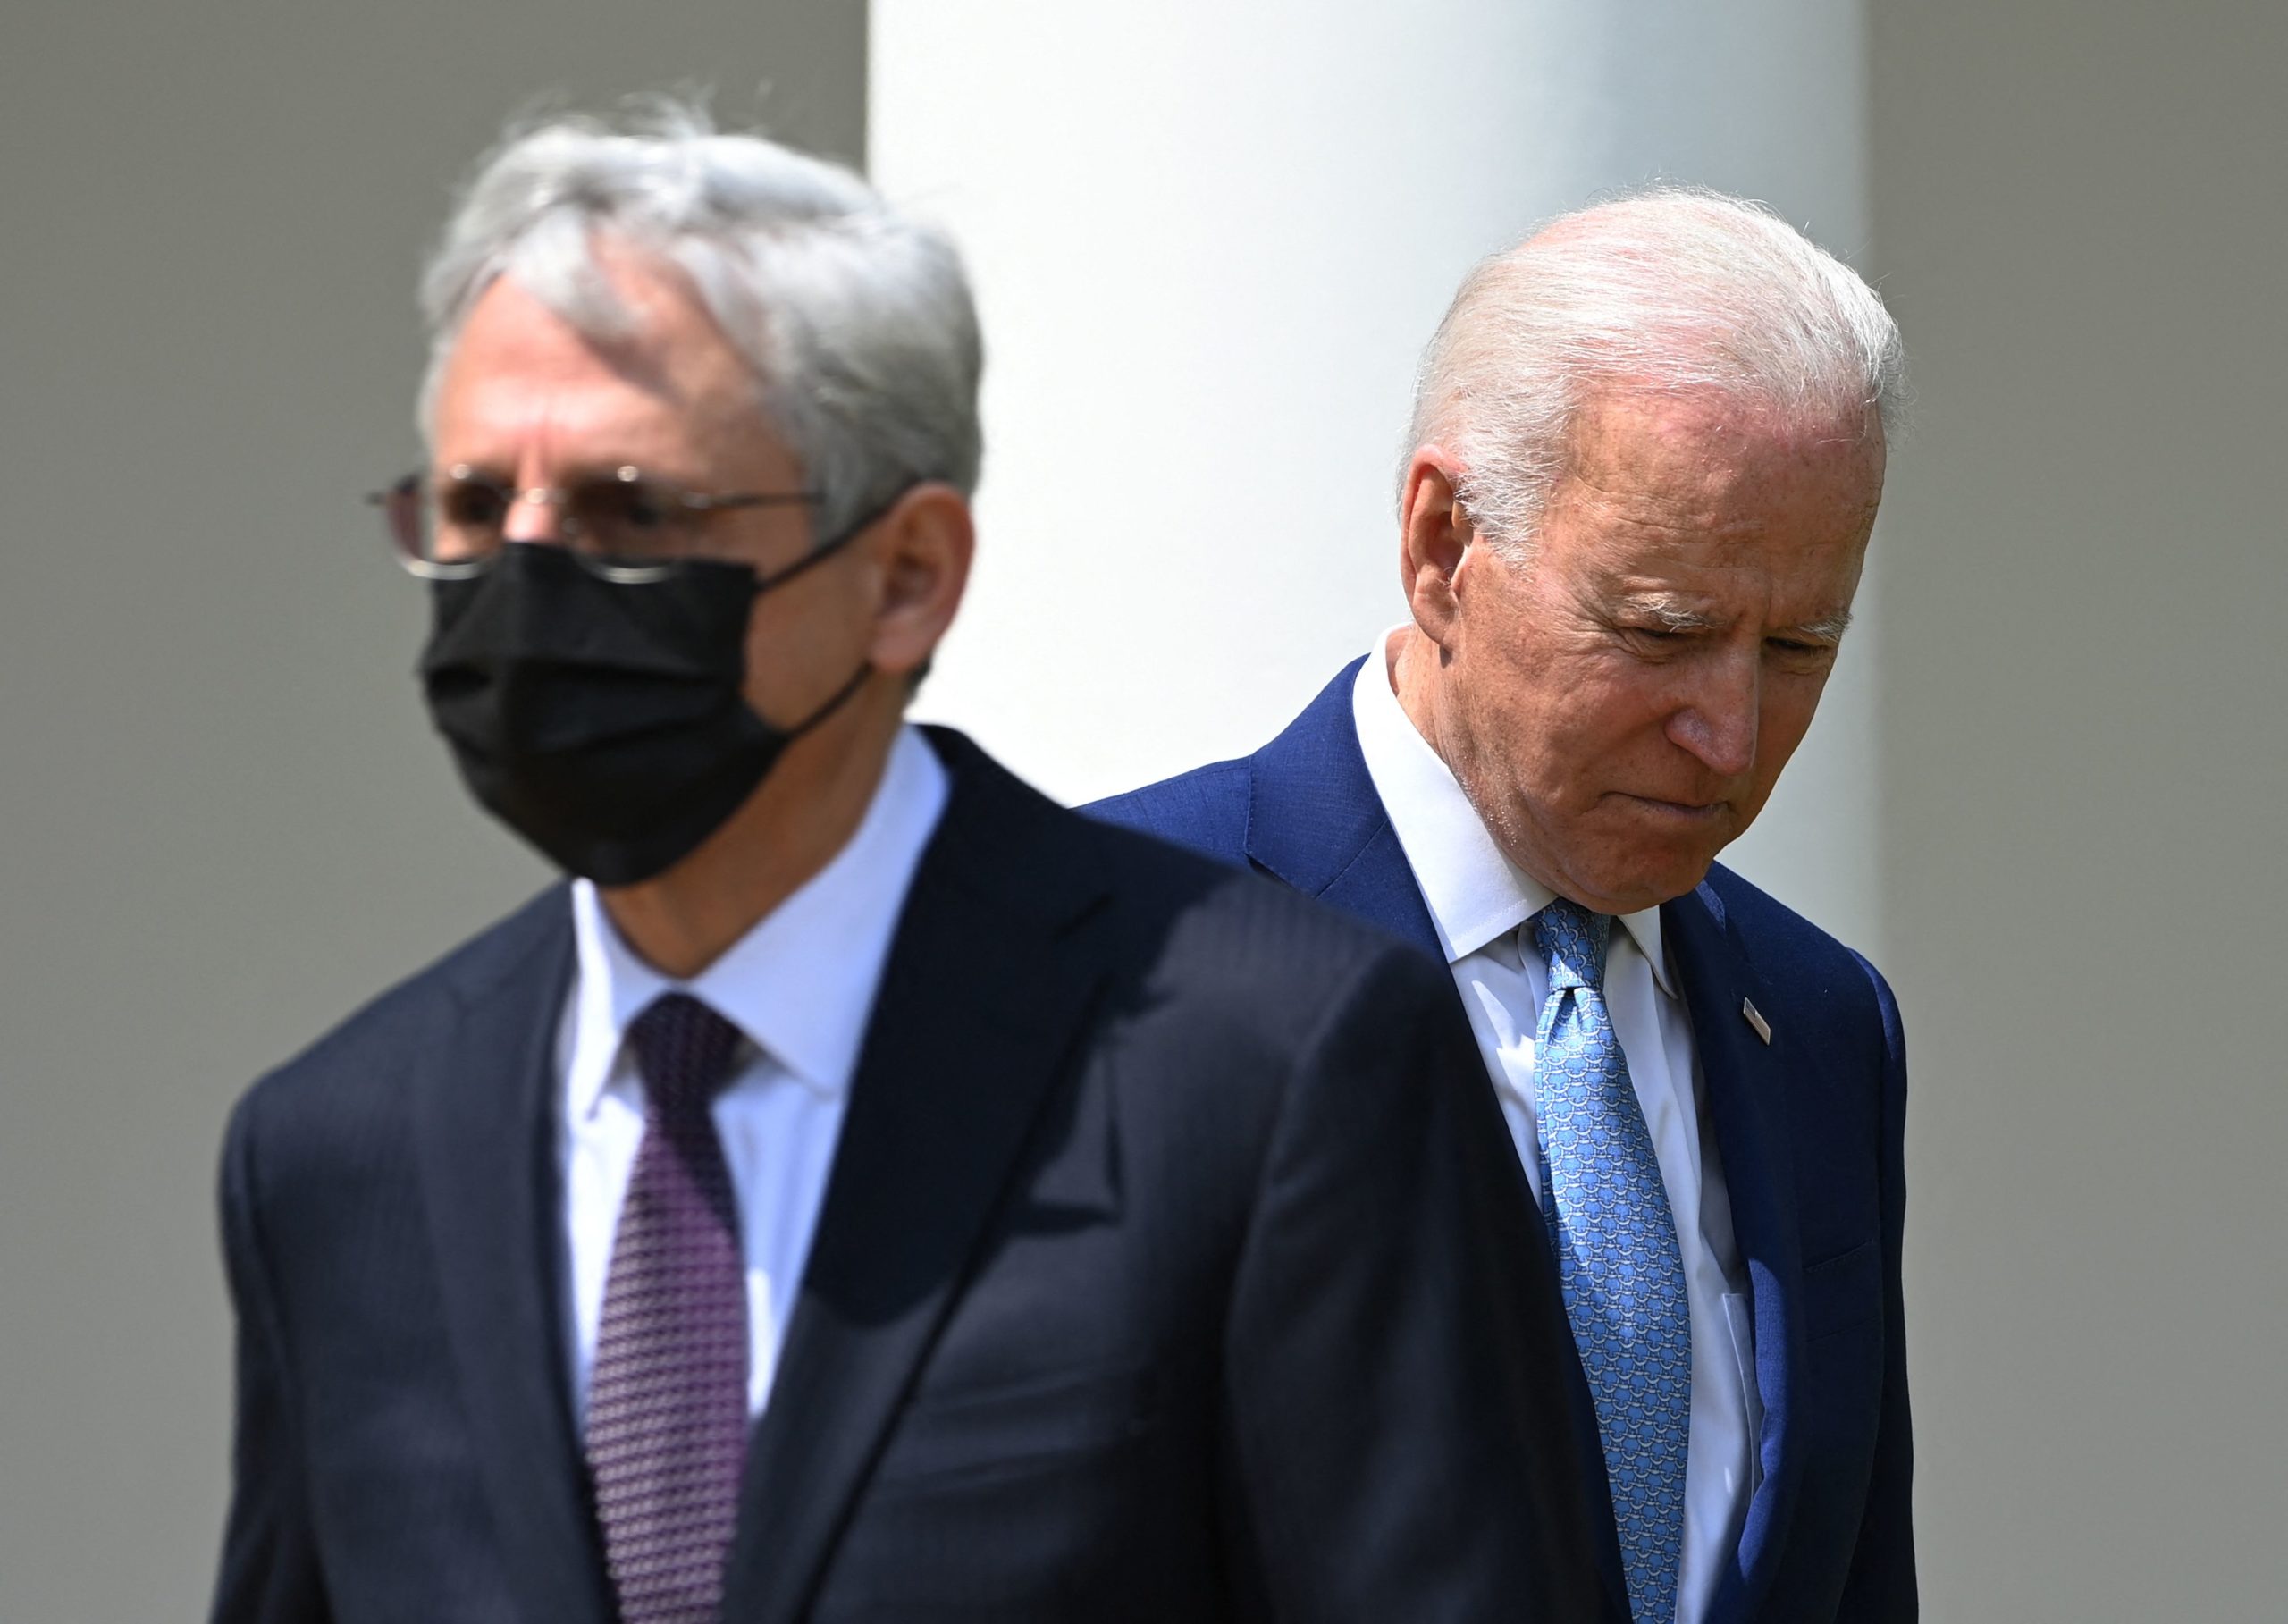 President Joe Biden and Attorney General Merrick Garland take part in an event about gun violence prevention at the White House on April 8. (Brendan Smialowski/AFP via Getty Images)